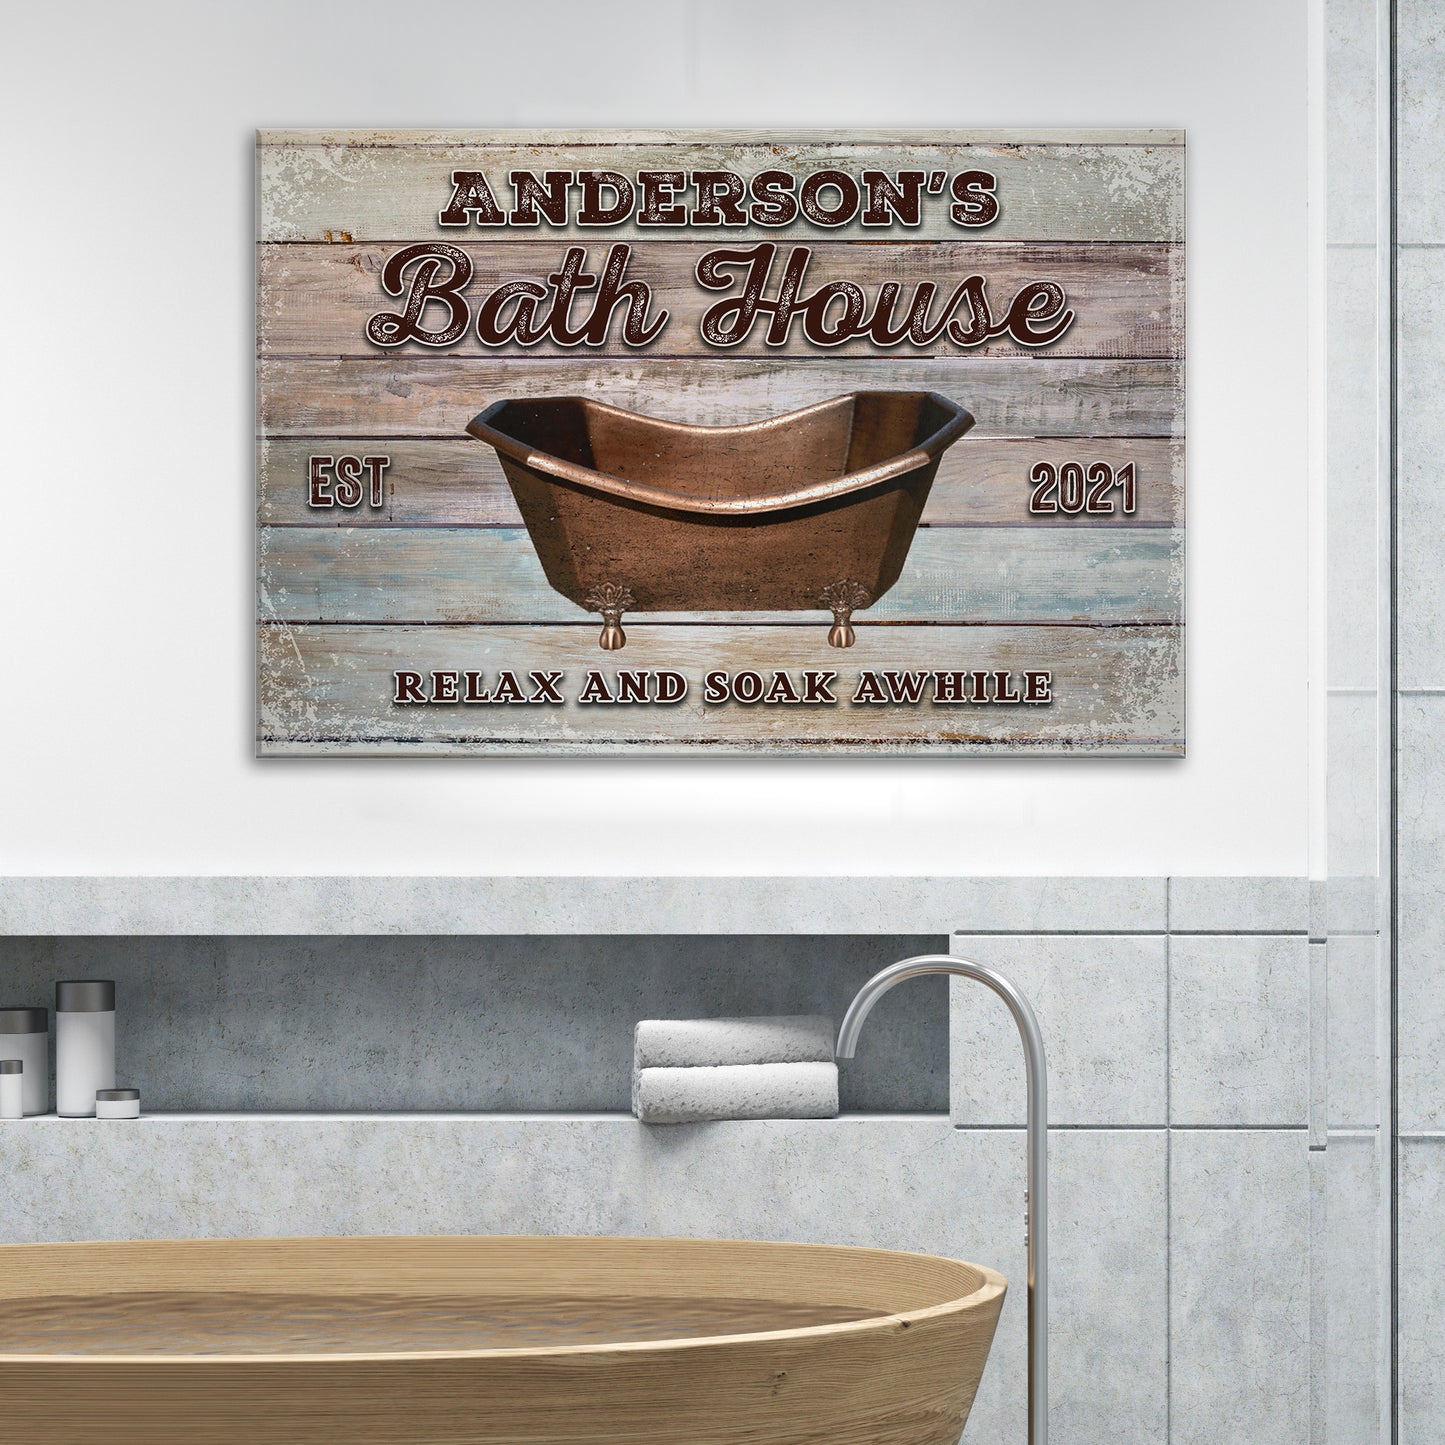 Relax And Soak Awhile Family Bath House Sign II - Image by Tailored Canvases